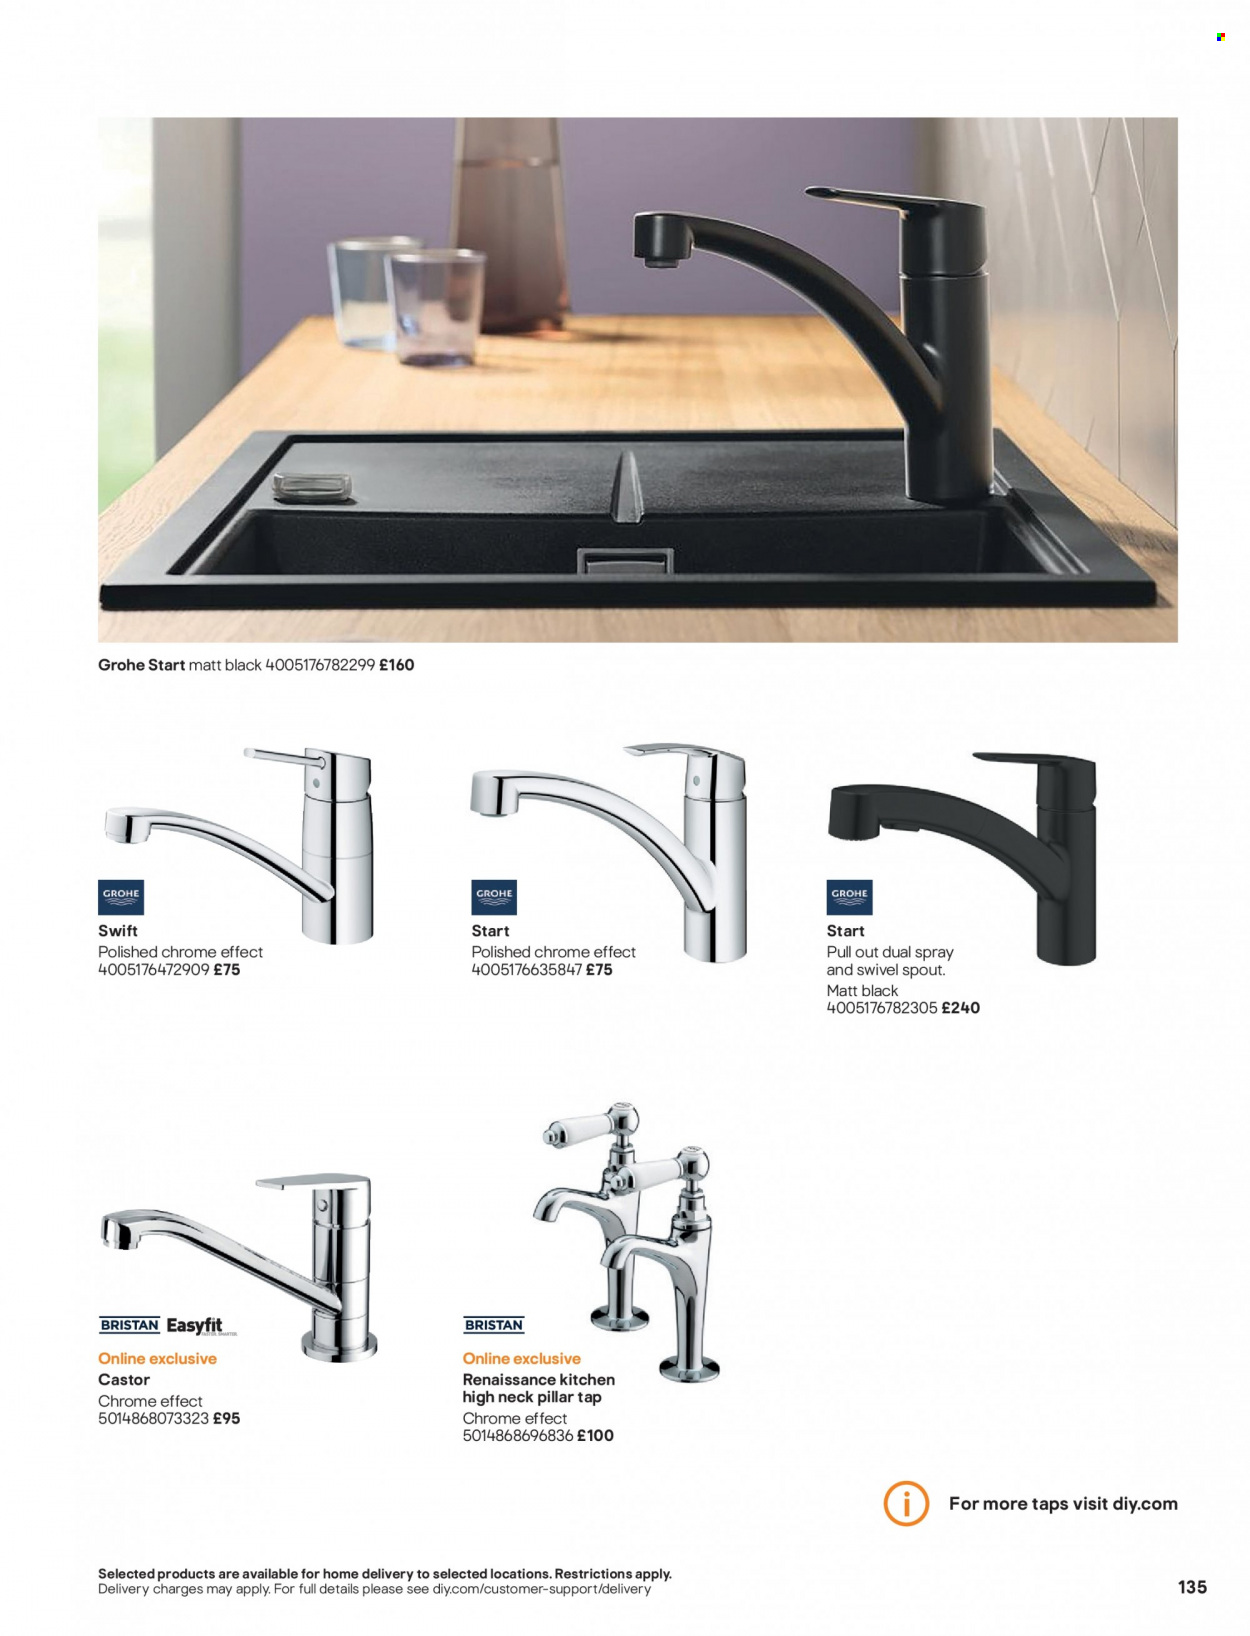 thumbnail - B&Q offer  - Sales products - Grohe. Page 135.